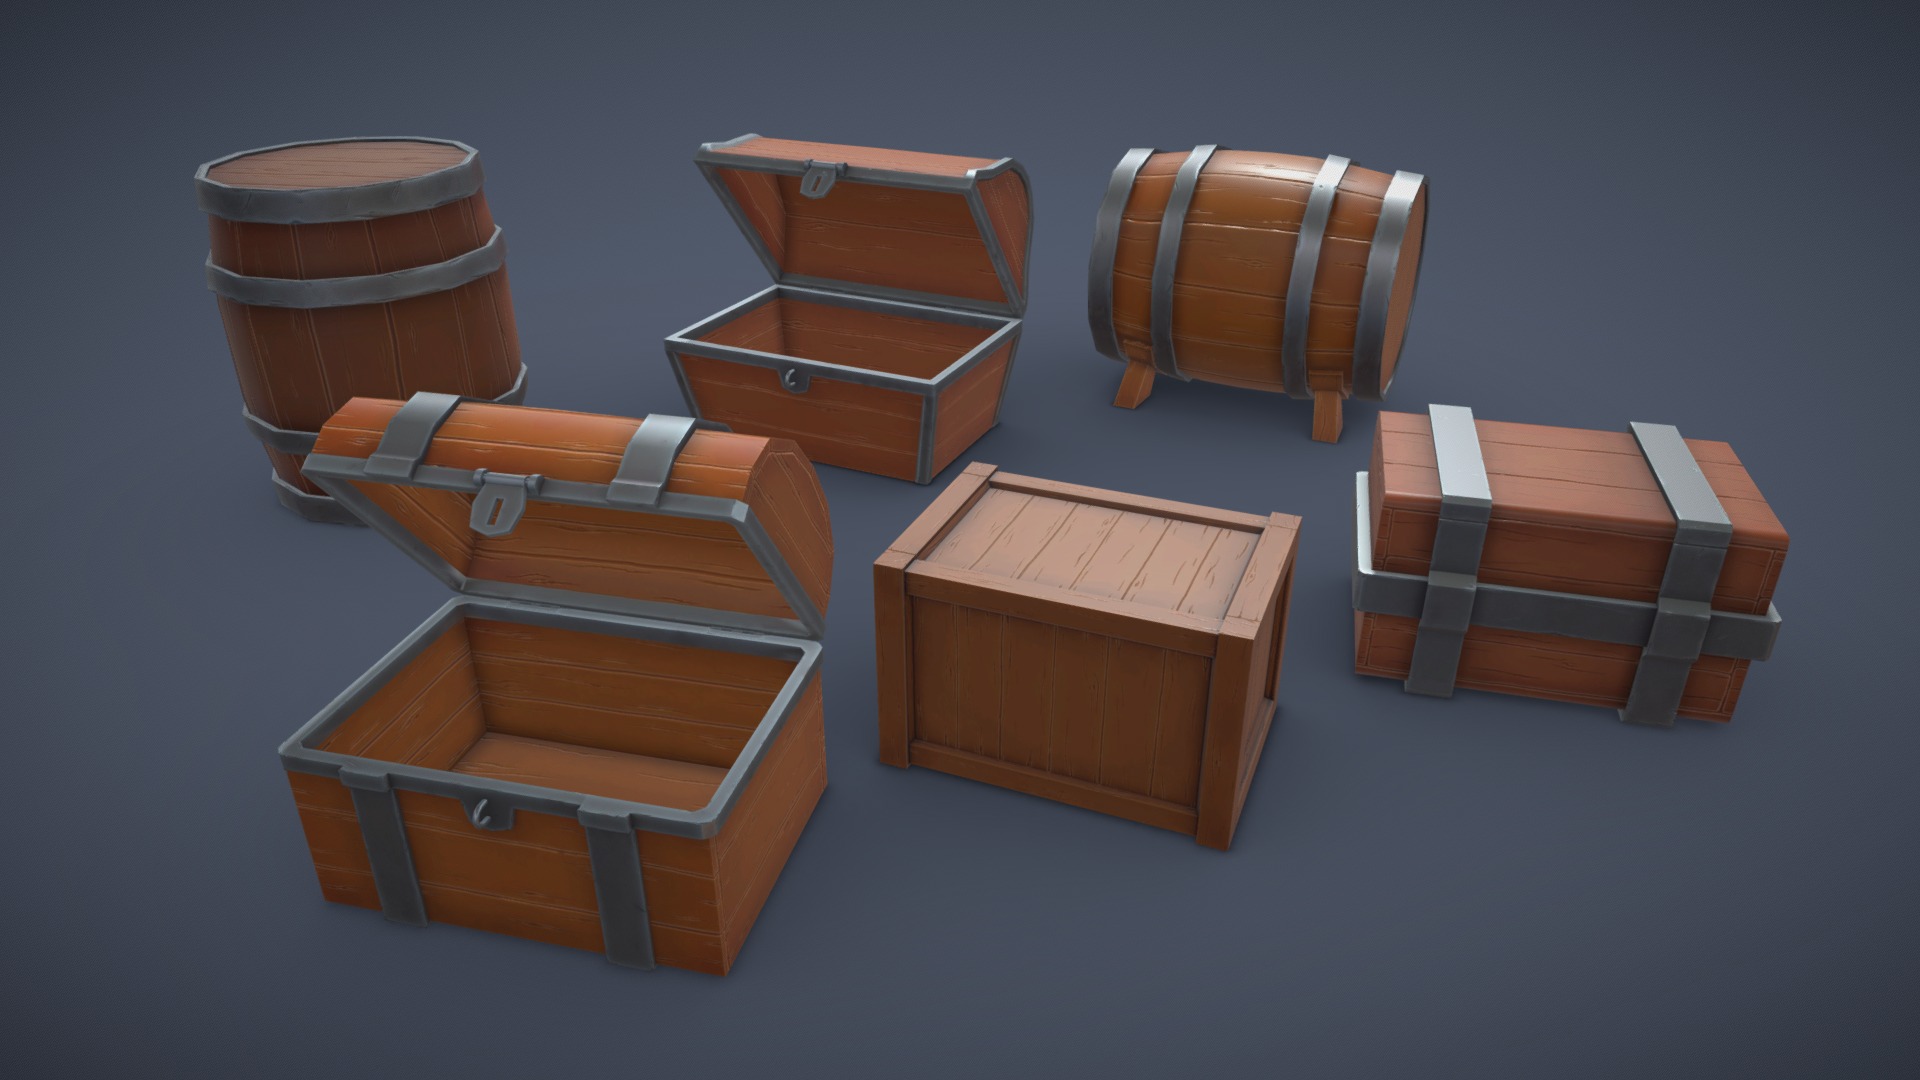 3D model Barrels, Boxes, Chests - This is a 3D model of the Barrels, Boxes, Chests. The 3D model is about a group of wooden chairs.